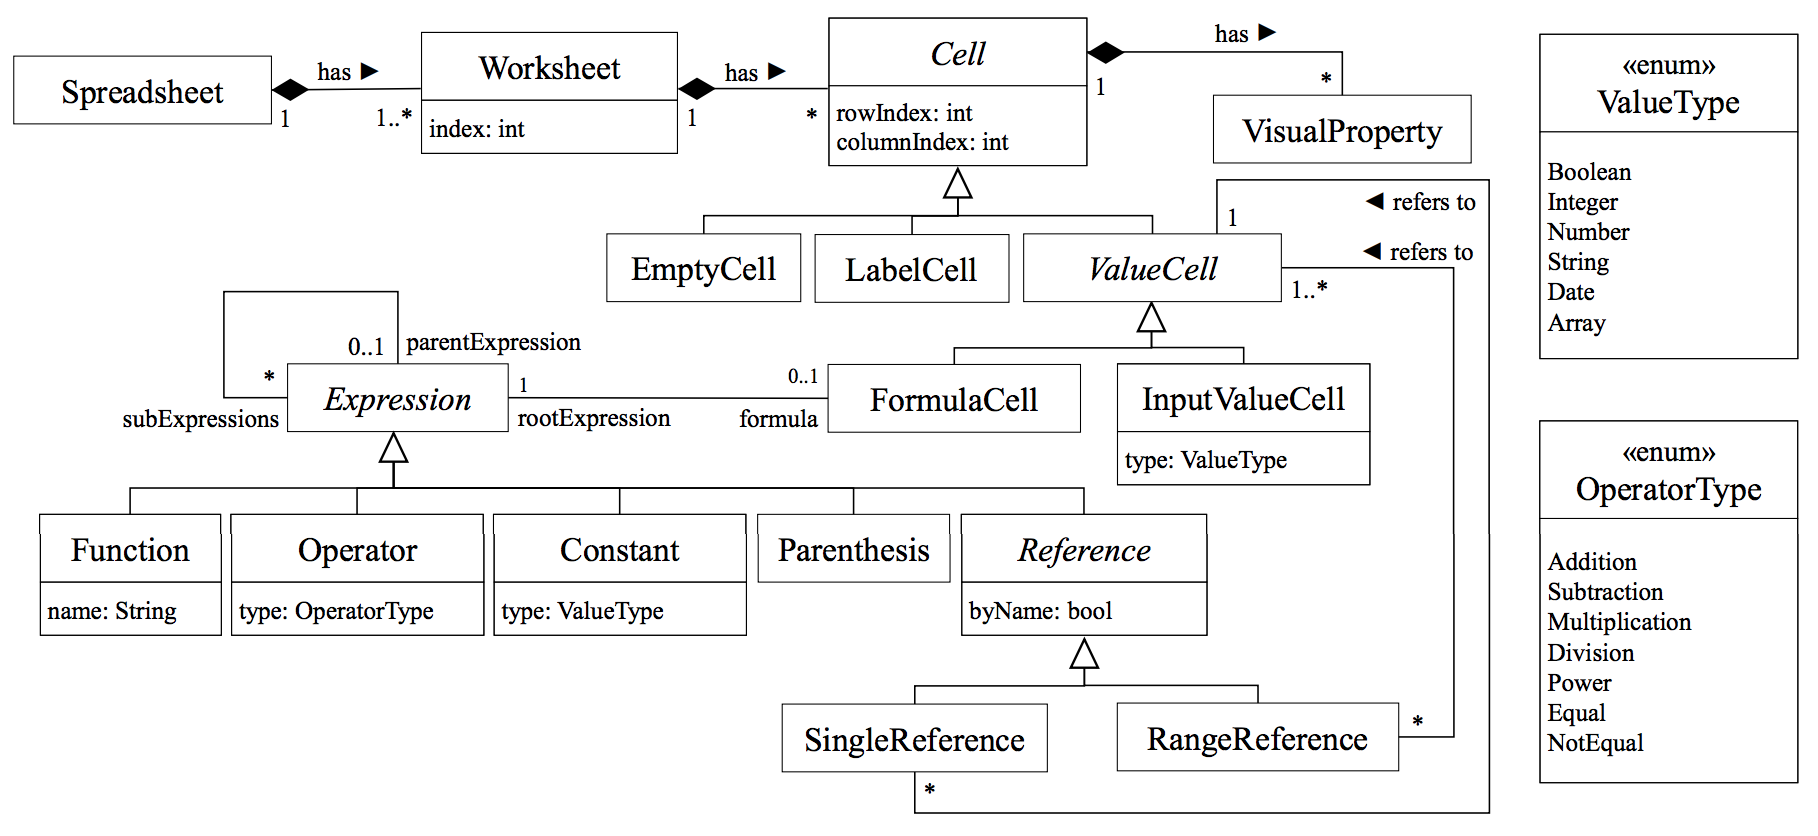 A conceptual and integrated model for measuring complexity in spreadsheets.